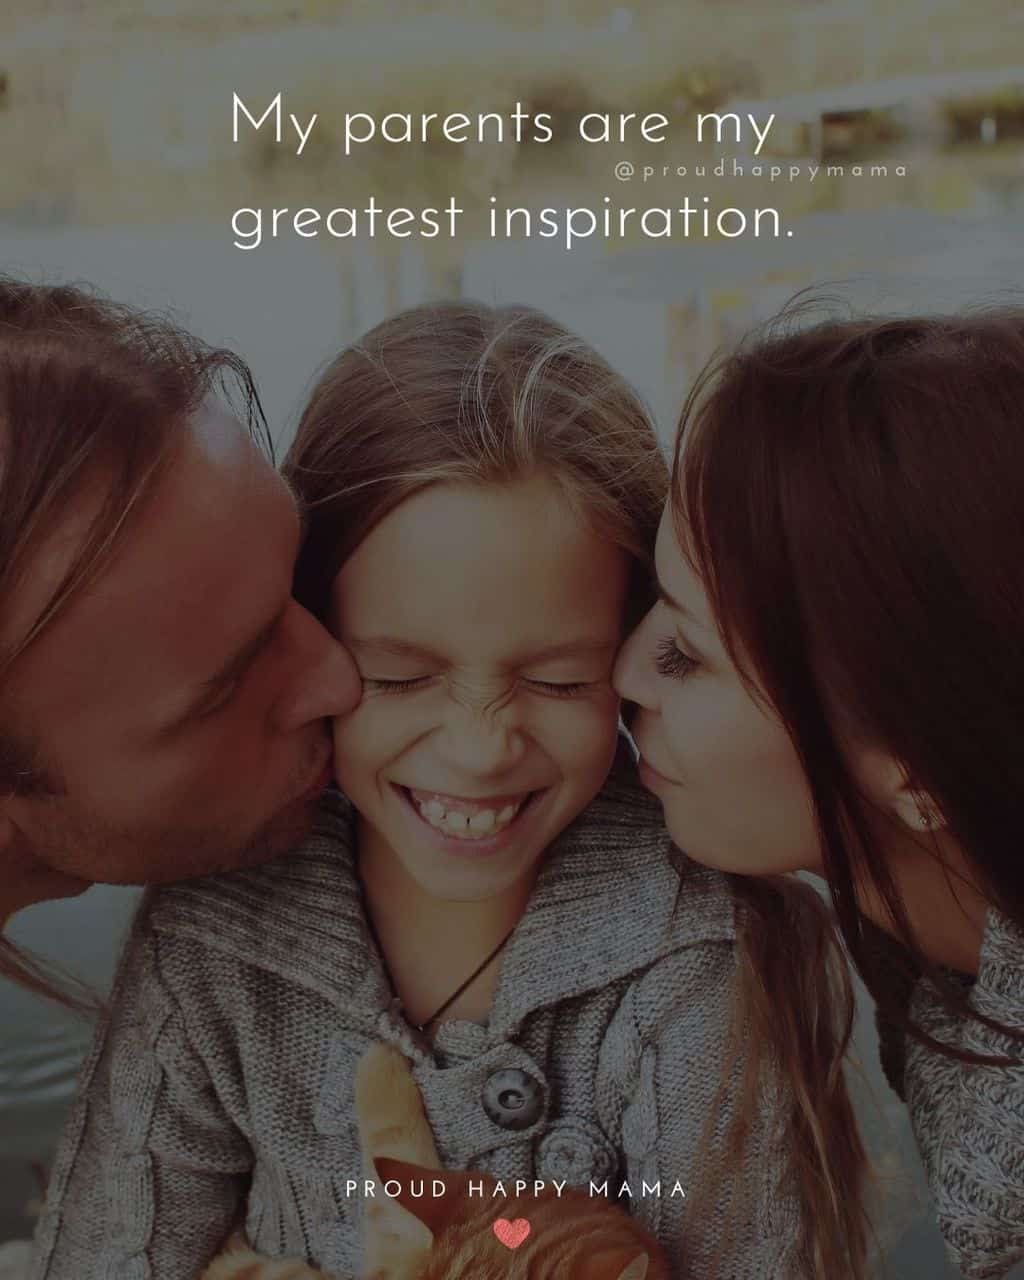 180+ BEST Quotes About Parents & Their Love [With Images]